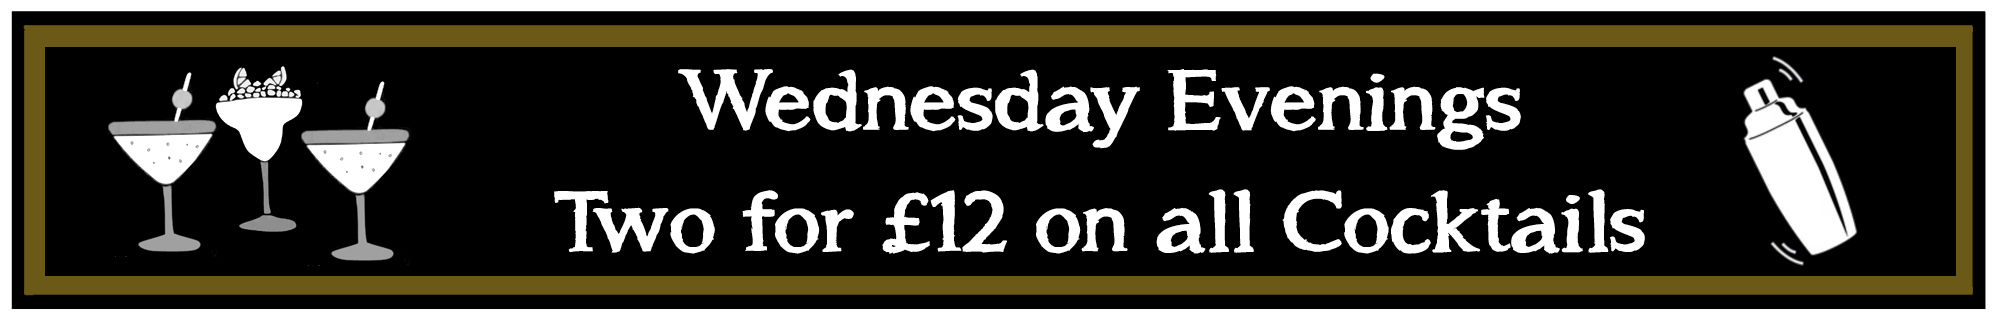 Wednesday evenings - Two for £12 on Cocktails